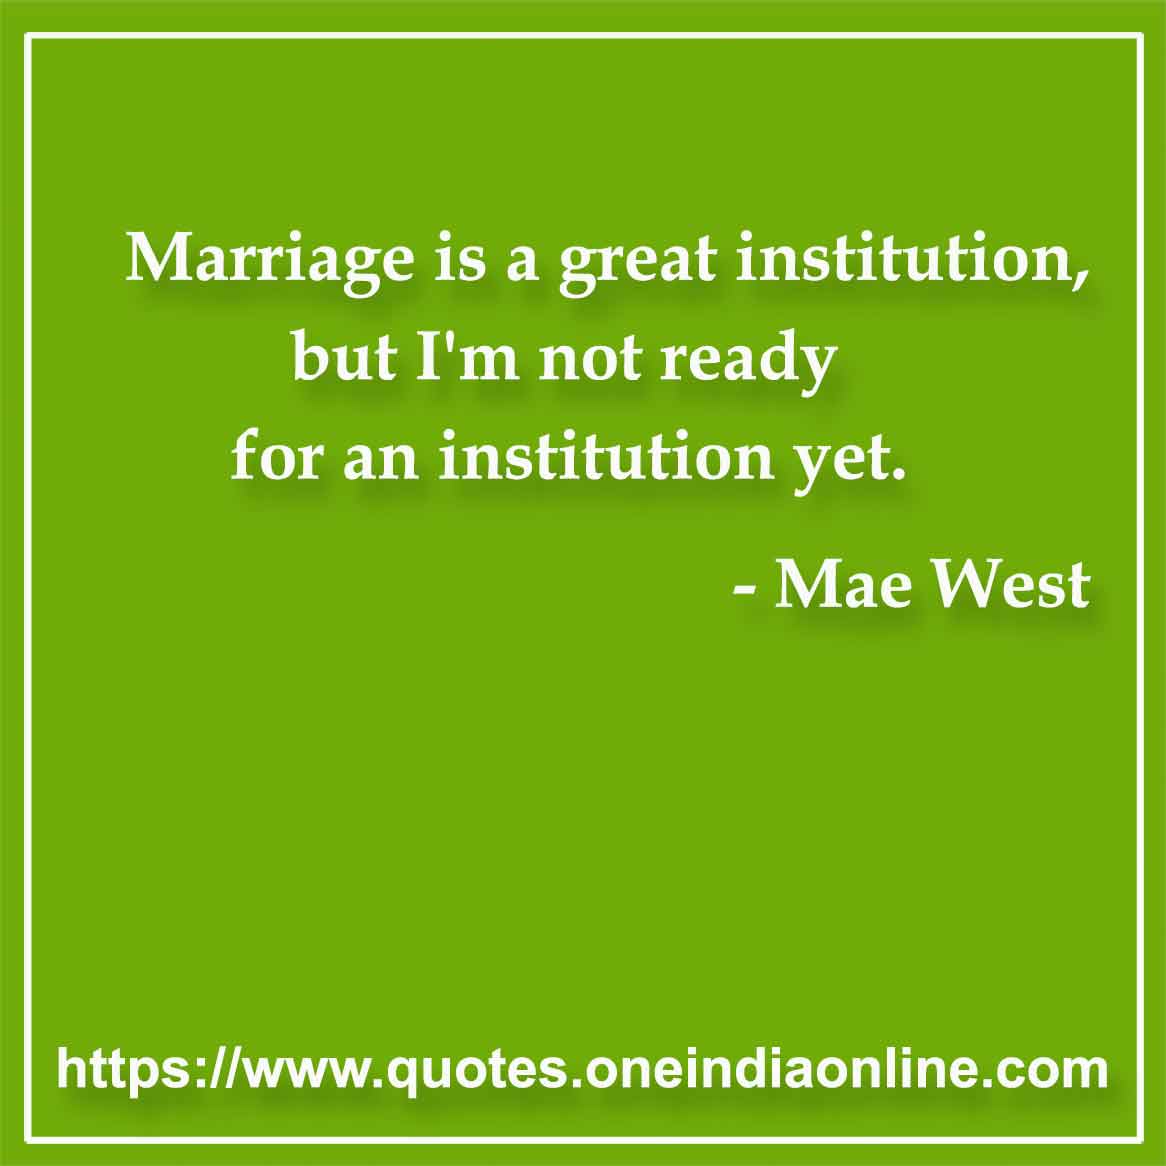 Marriage is a great institution, but I'm not ready for an institution yet.

- Marriage Quotes by Mae West